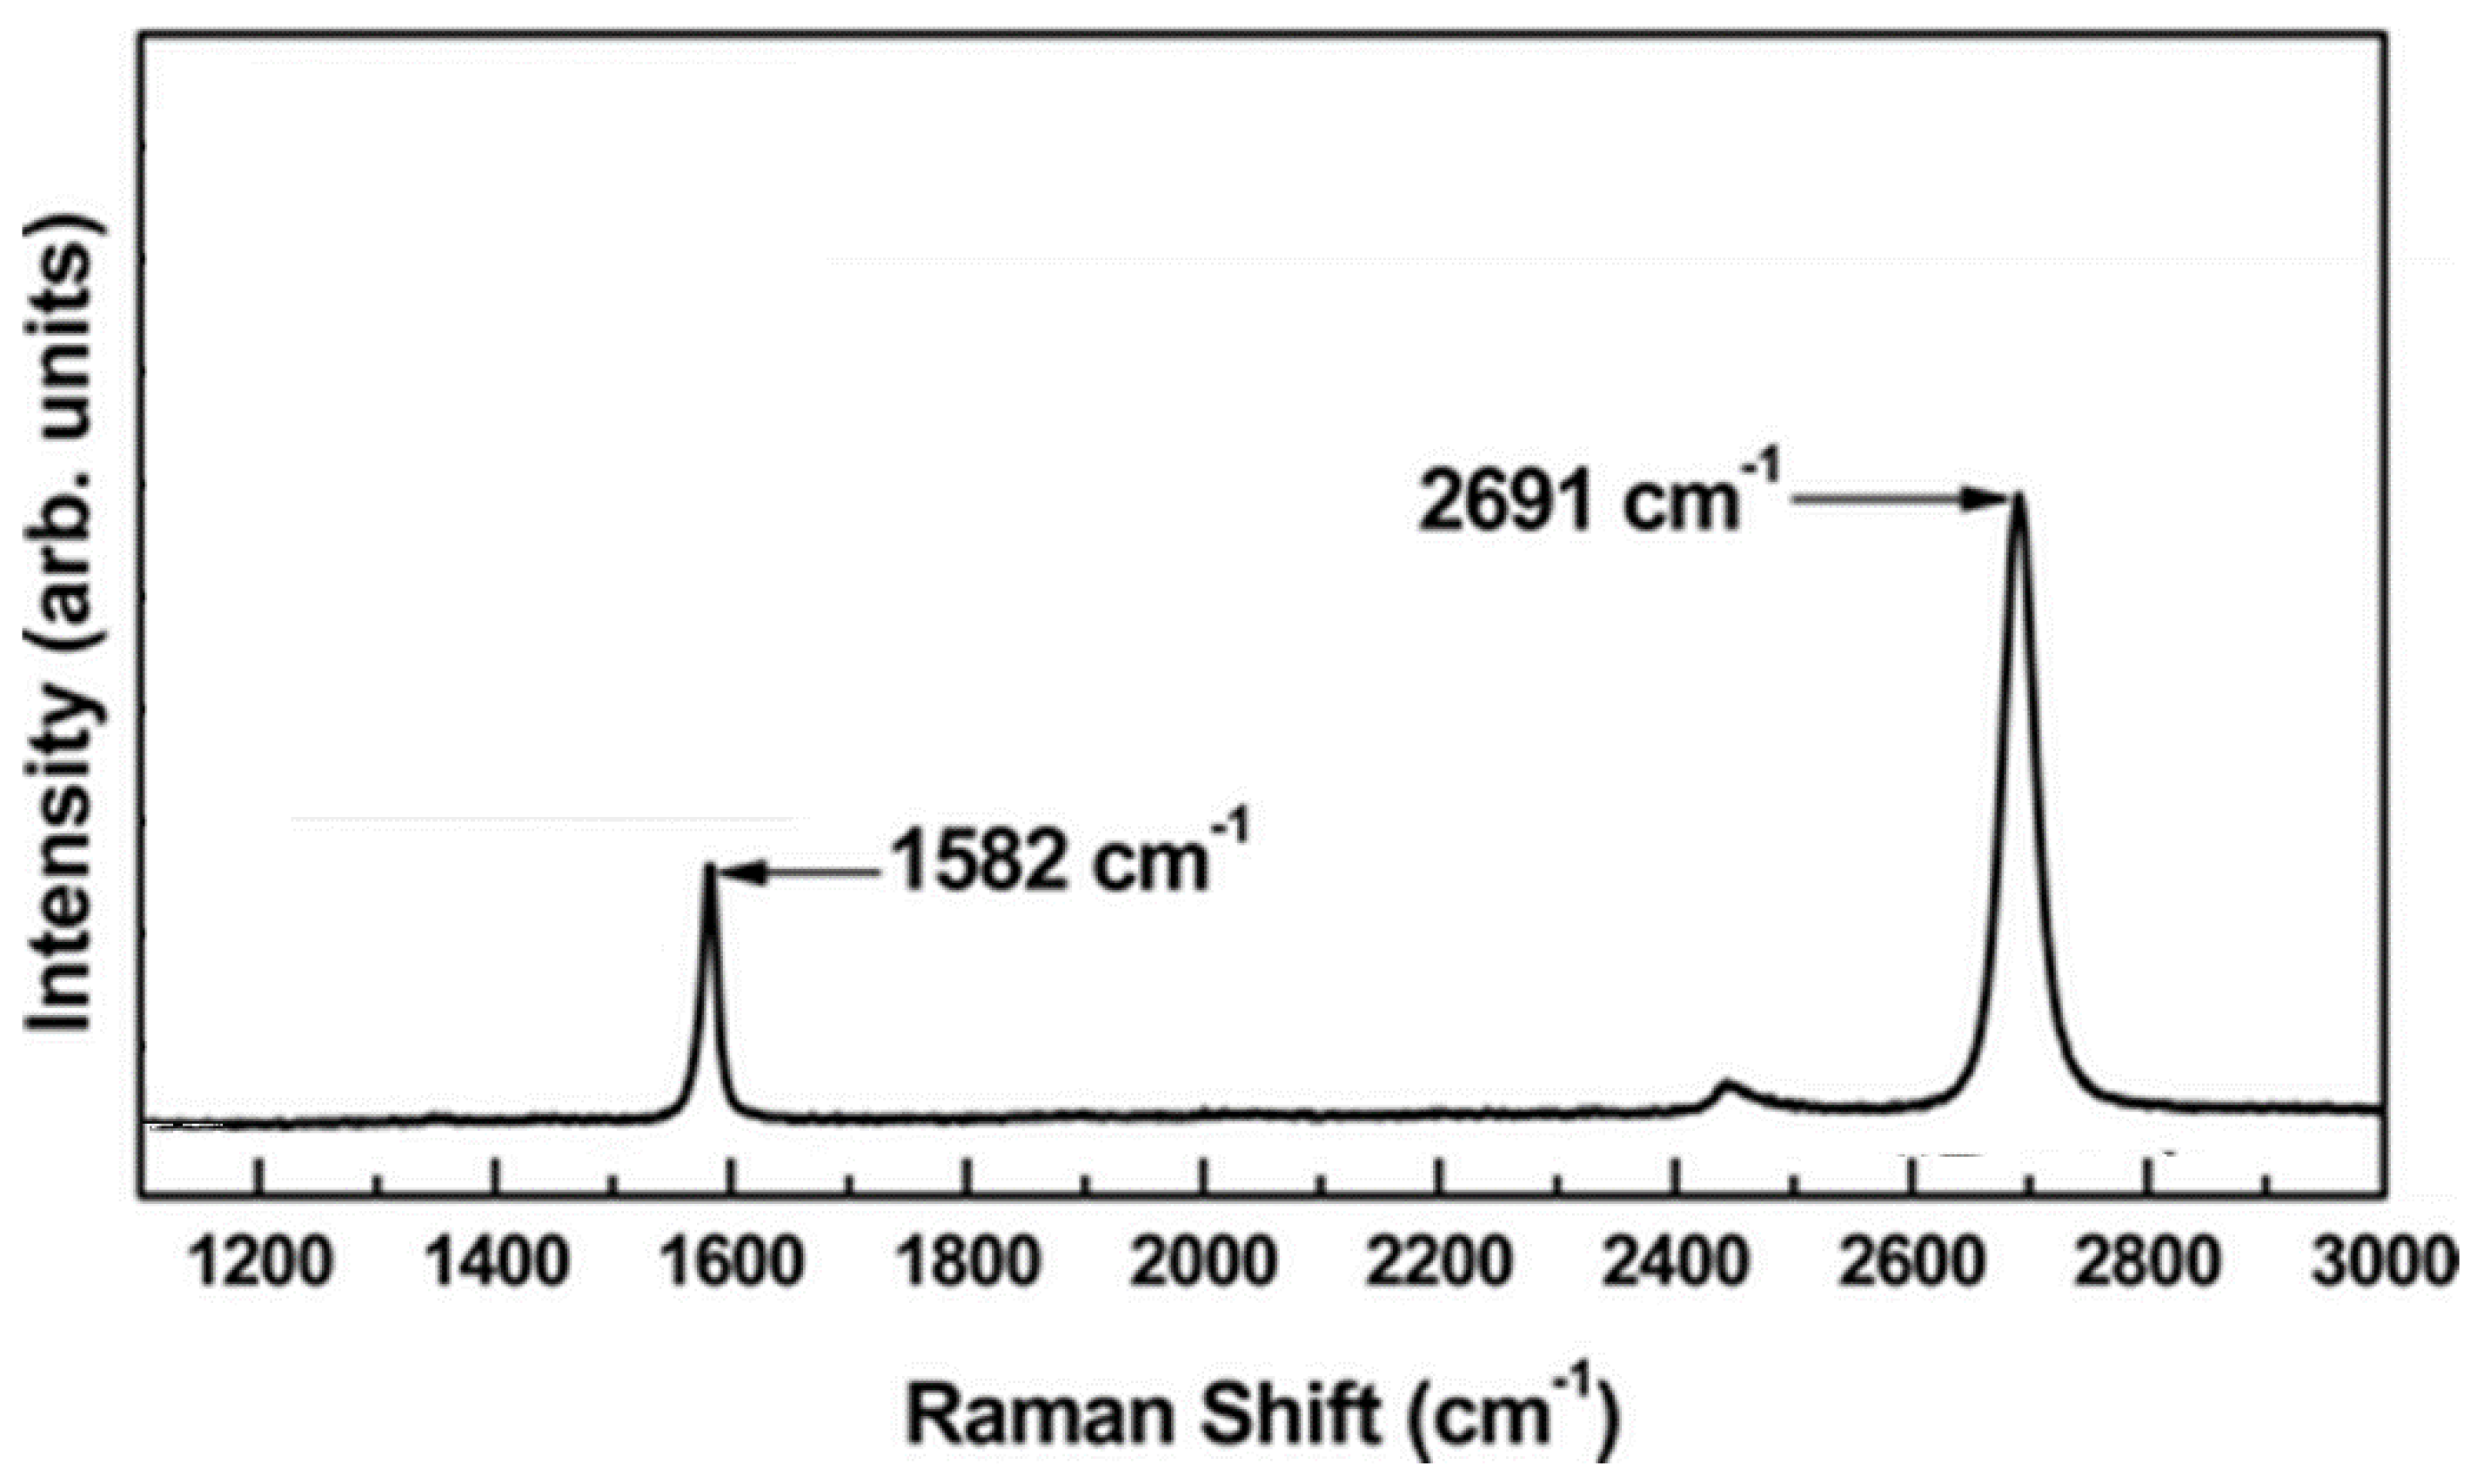 QR code micro-certified gemstones: femtosecond writing and Raman  characterization in Diamond, Ruby and Sapphire